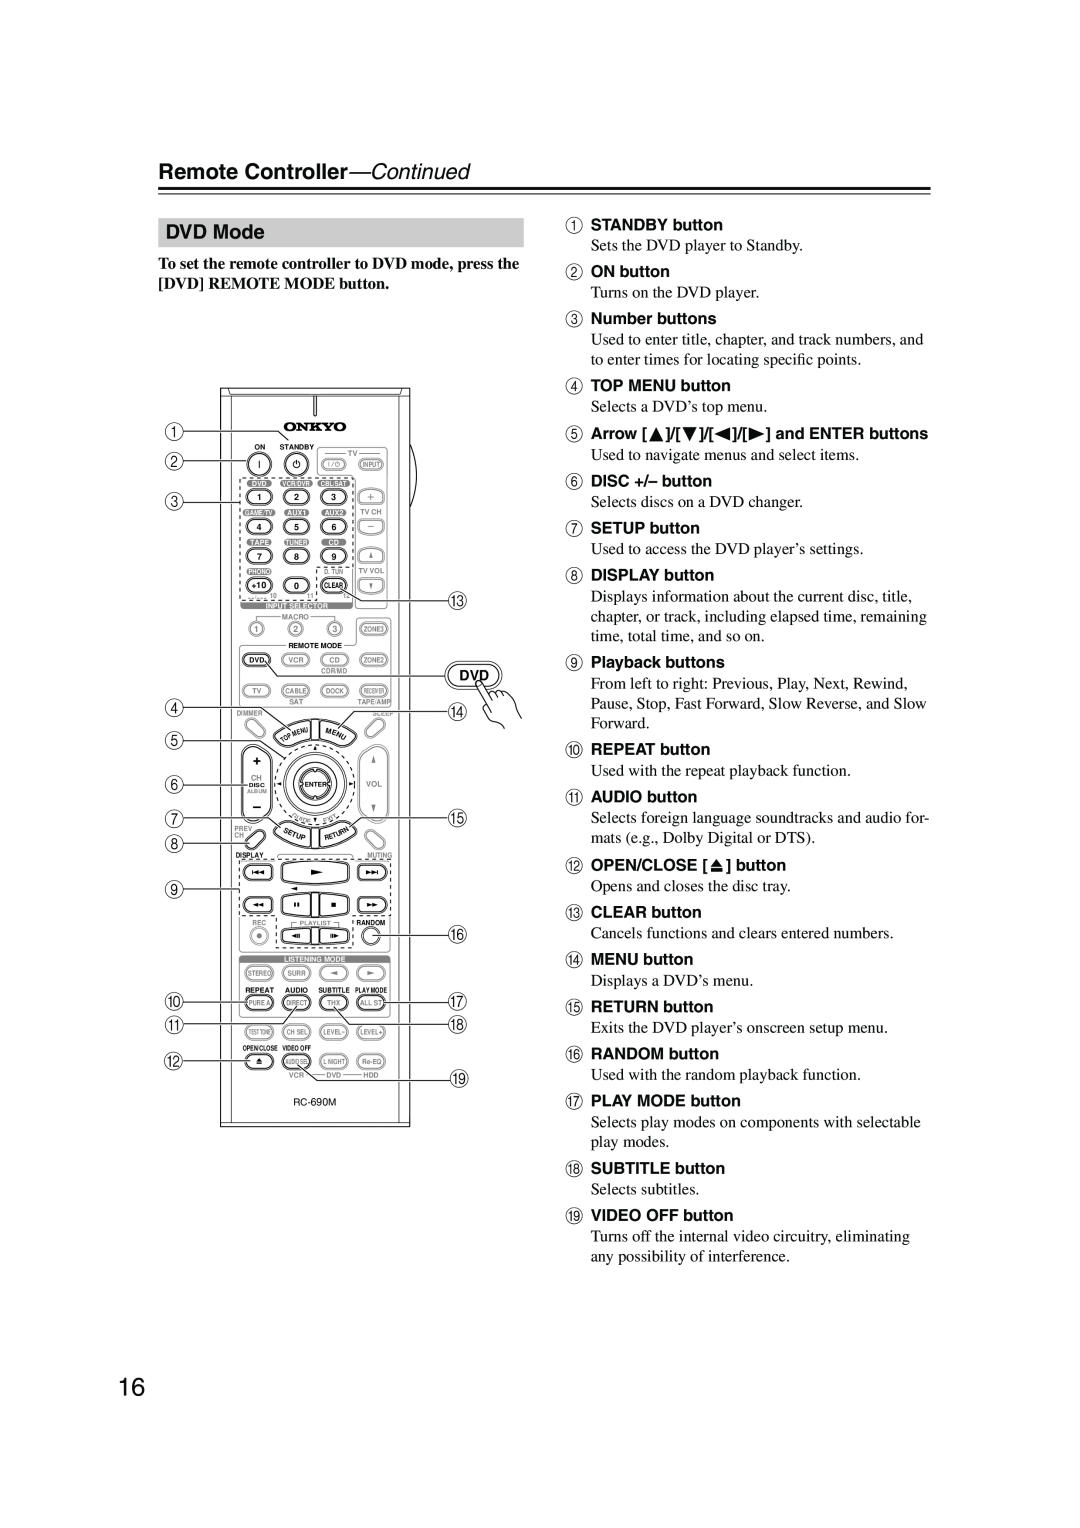 Onkyo PR-SC885 instruction manual DVD Mode, Remote Controller—Continued 